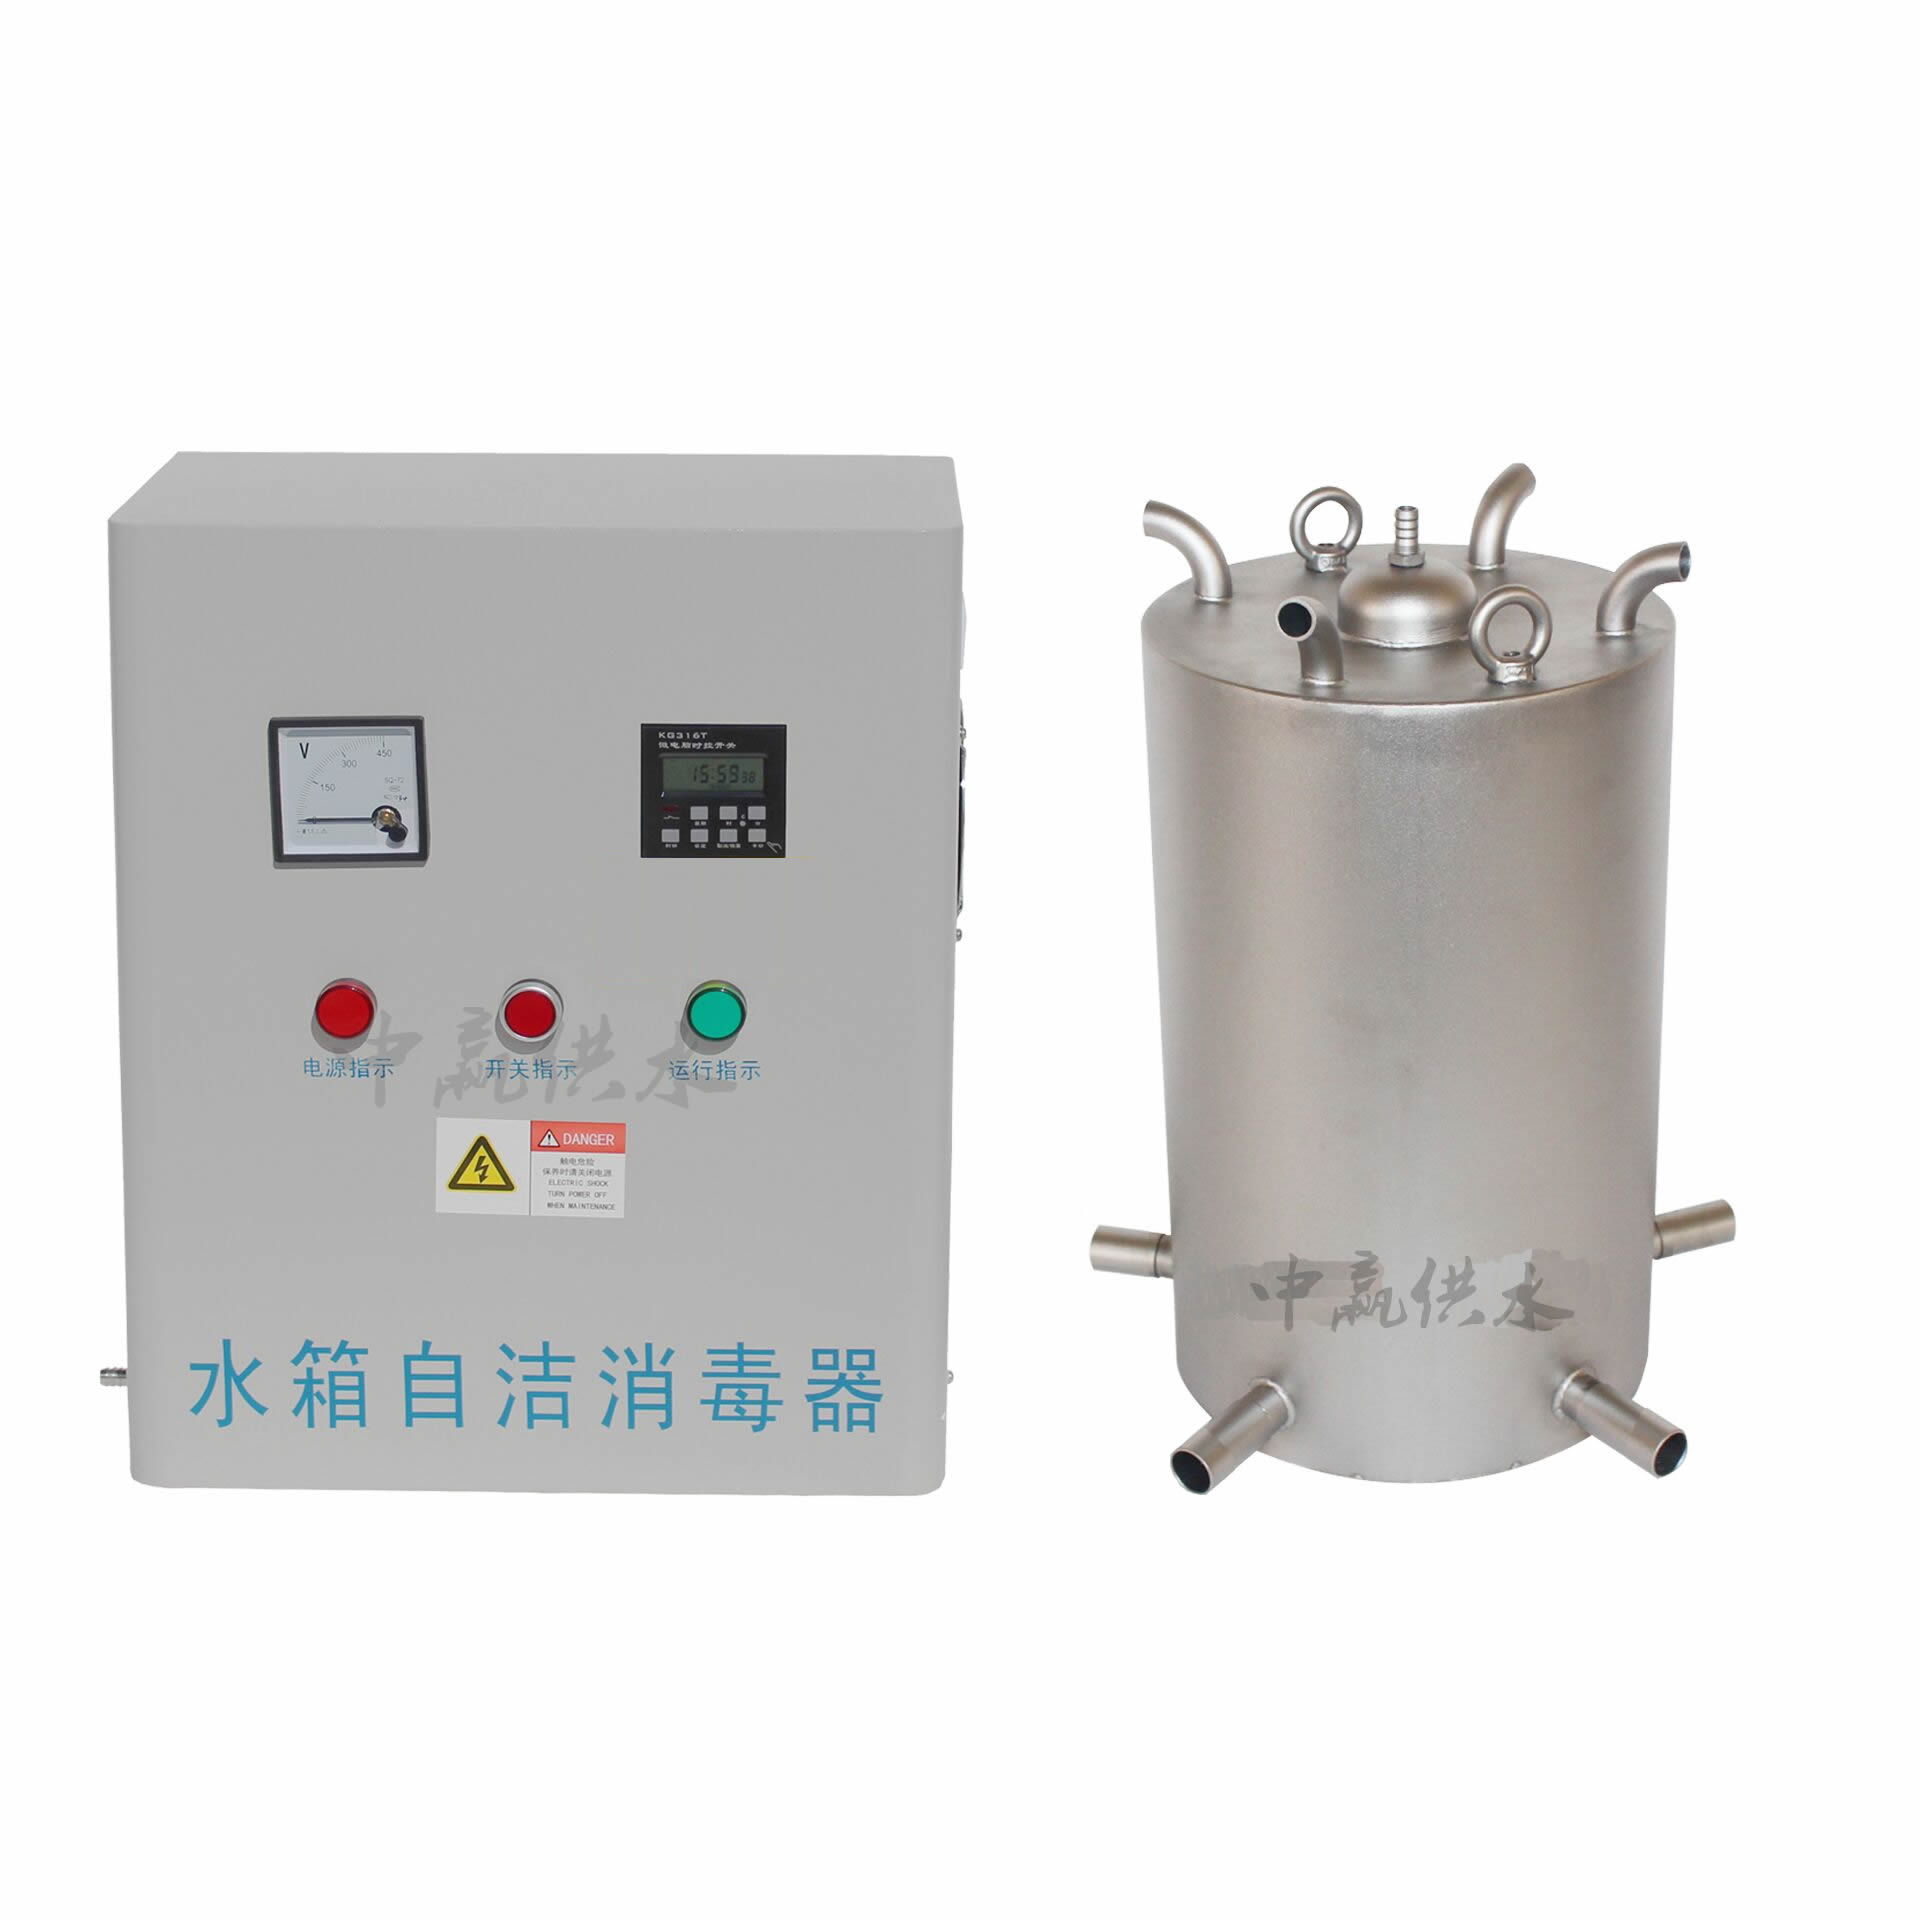 Water self cleaning sterilizer